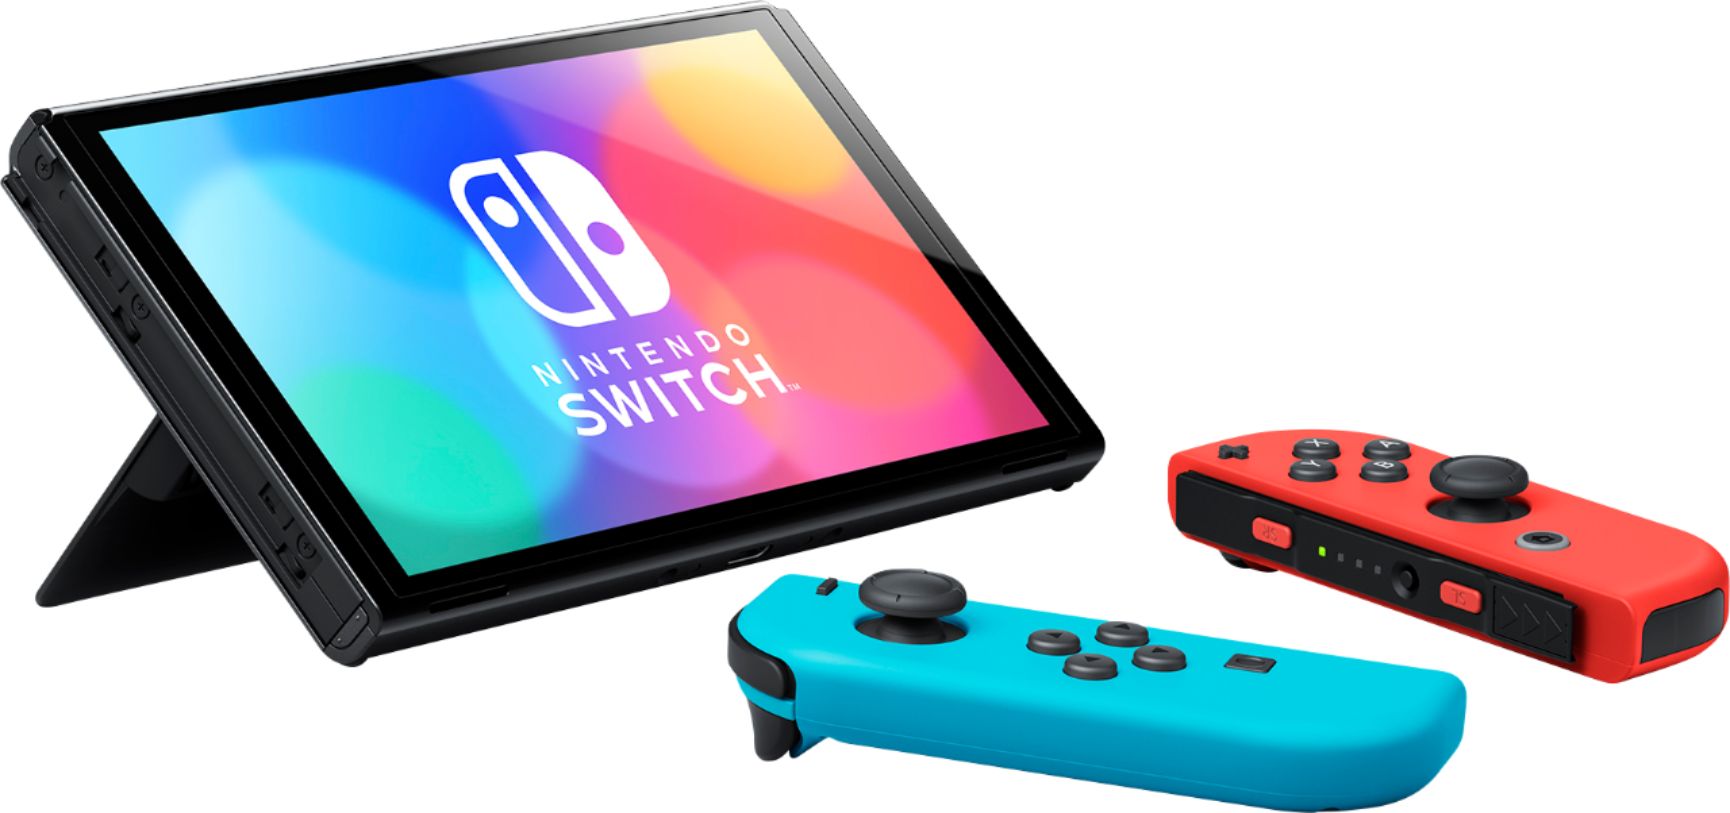 2022 New Nintendo Switch OLED Model Neon Red & Blue Joy Con 64GB Console HD Screen & LAN-Port Dock with Super Mario Maker 2, Mytrix 128GB MicroSD Card and Accessories